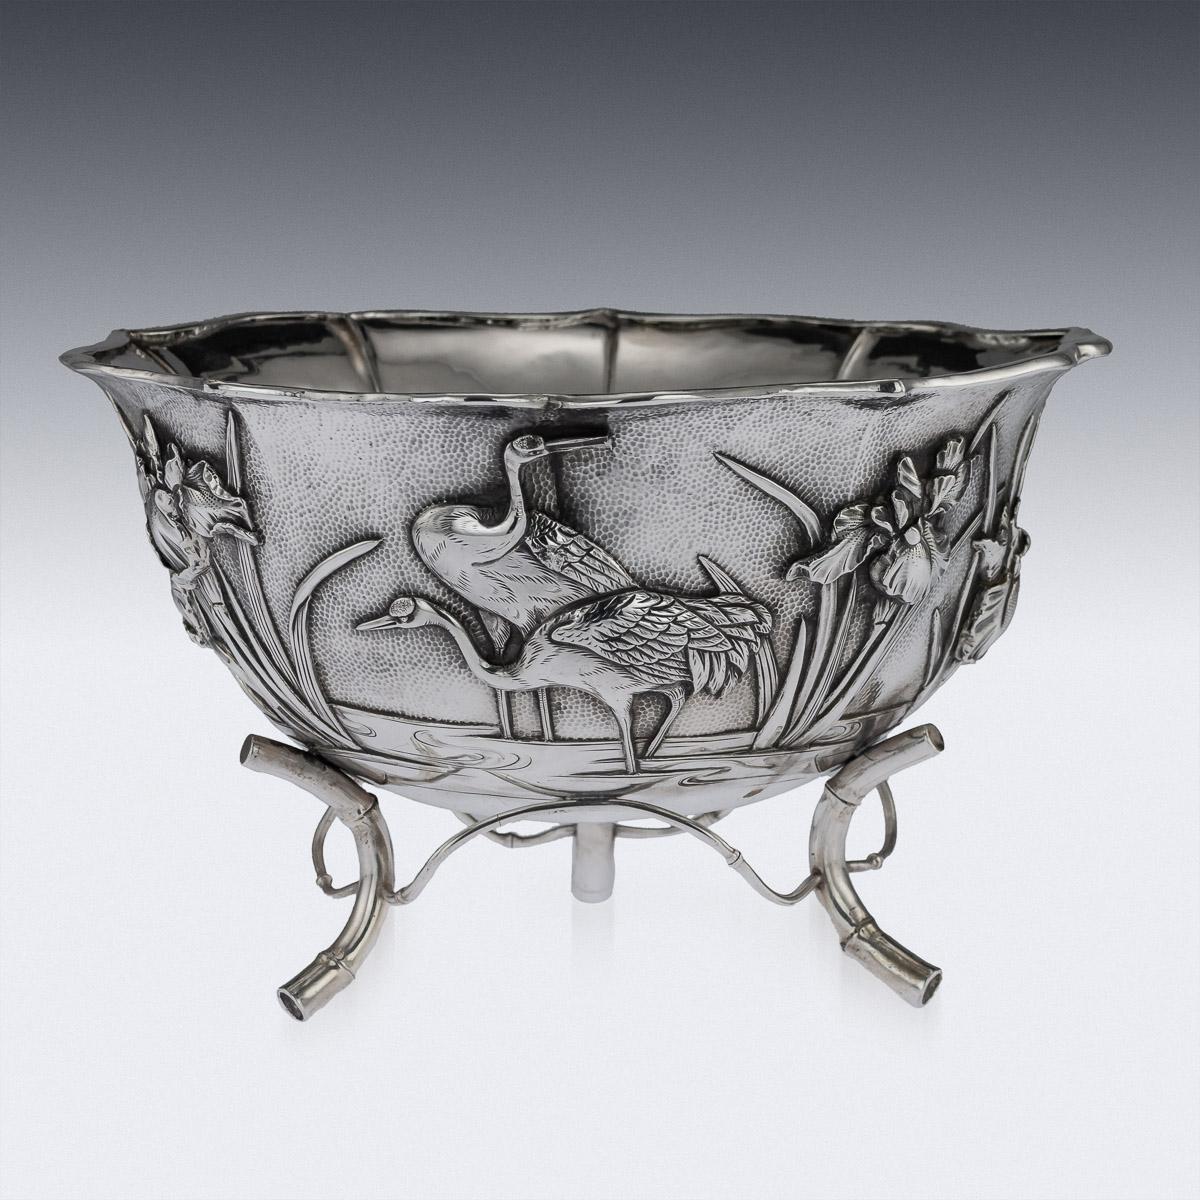 Antique early 20th century Japanese Meiji period solid silver bowl, double walled, chased and embossed with blossoming irises and cranes in high relief on matted ground, shaped floral rim applied with a pronounced boarder and standing on three